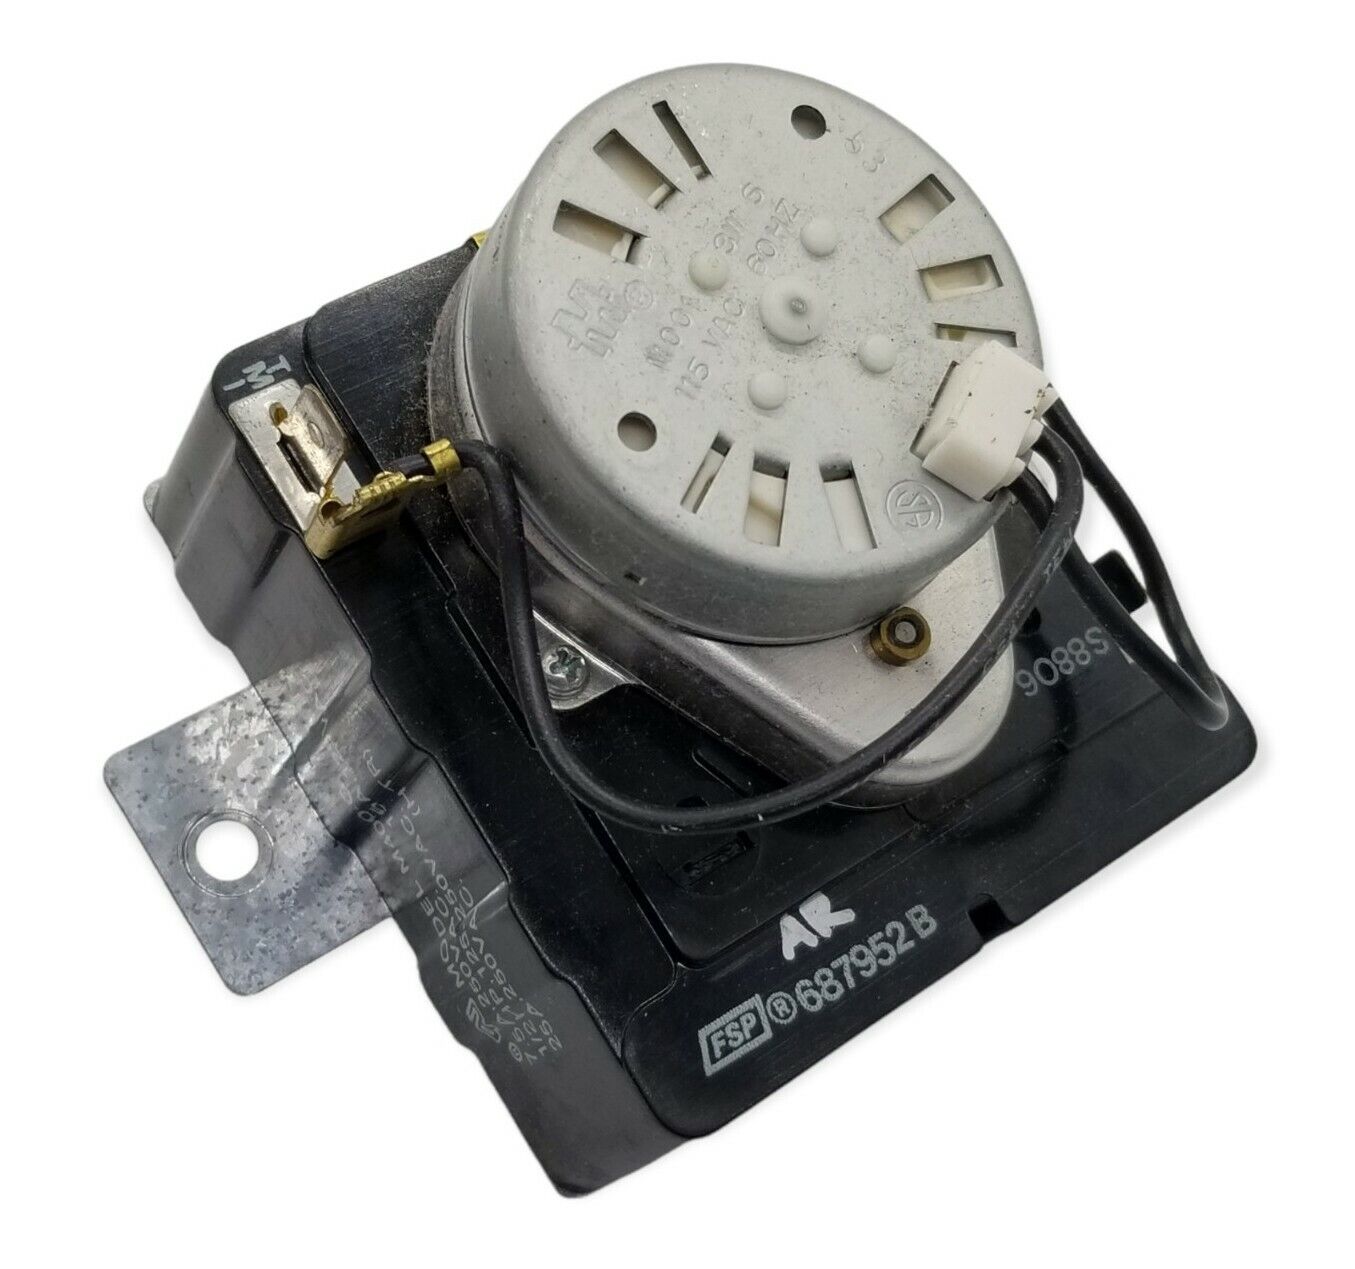 Genuine OEM Replacement for Kenmore Dryer Timer 687952